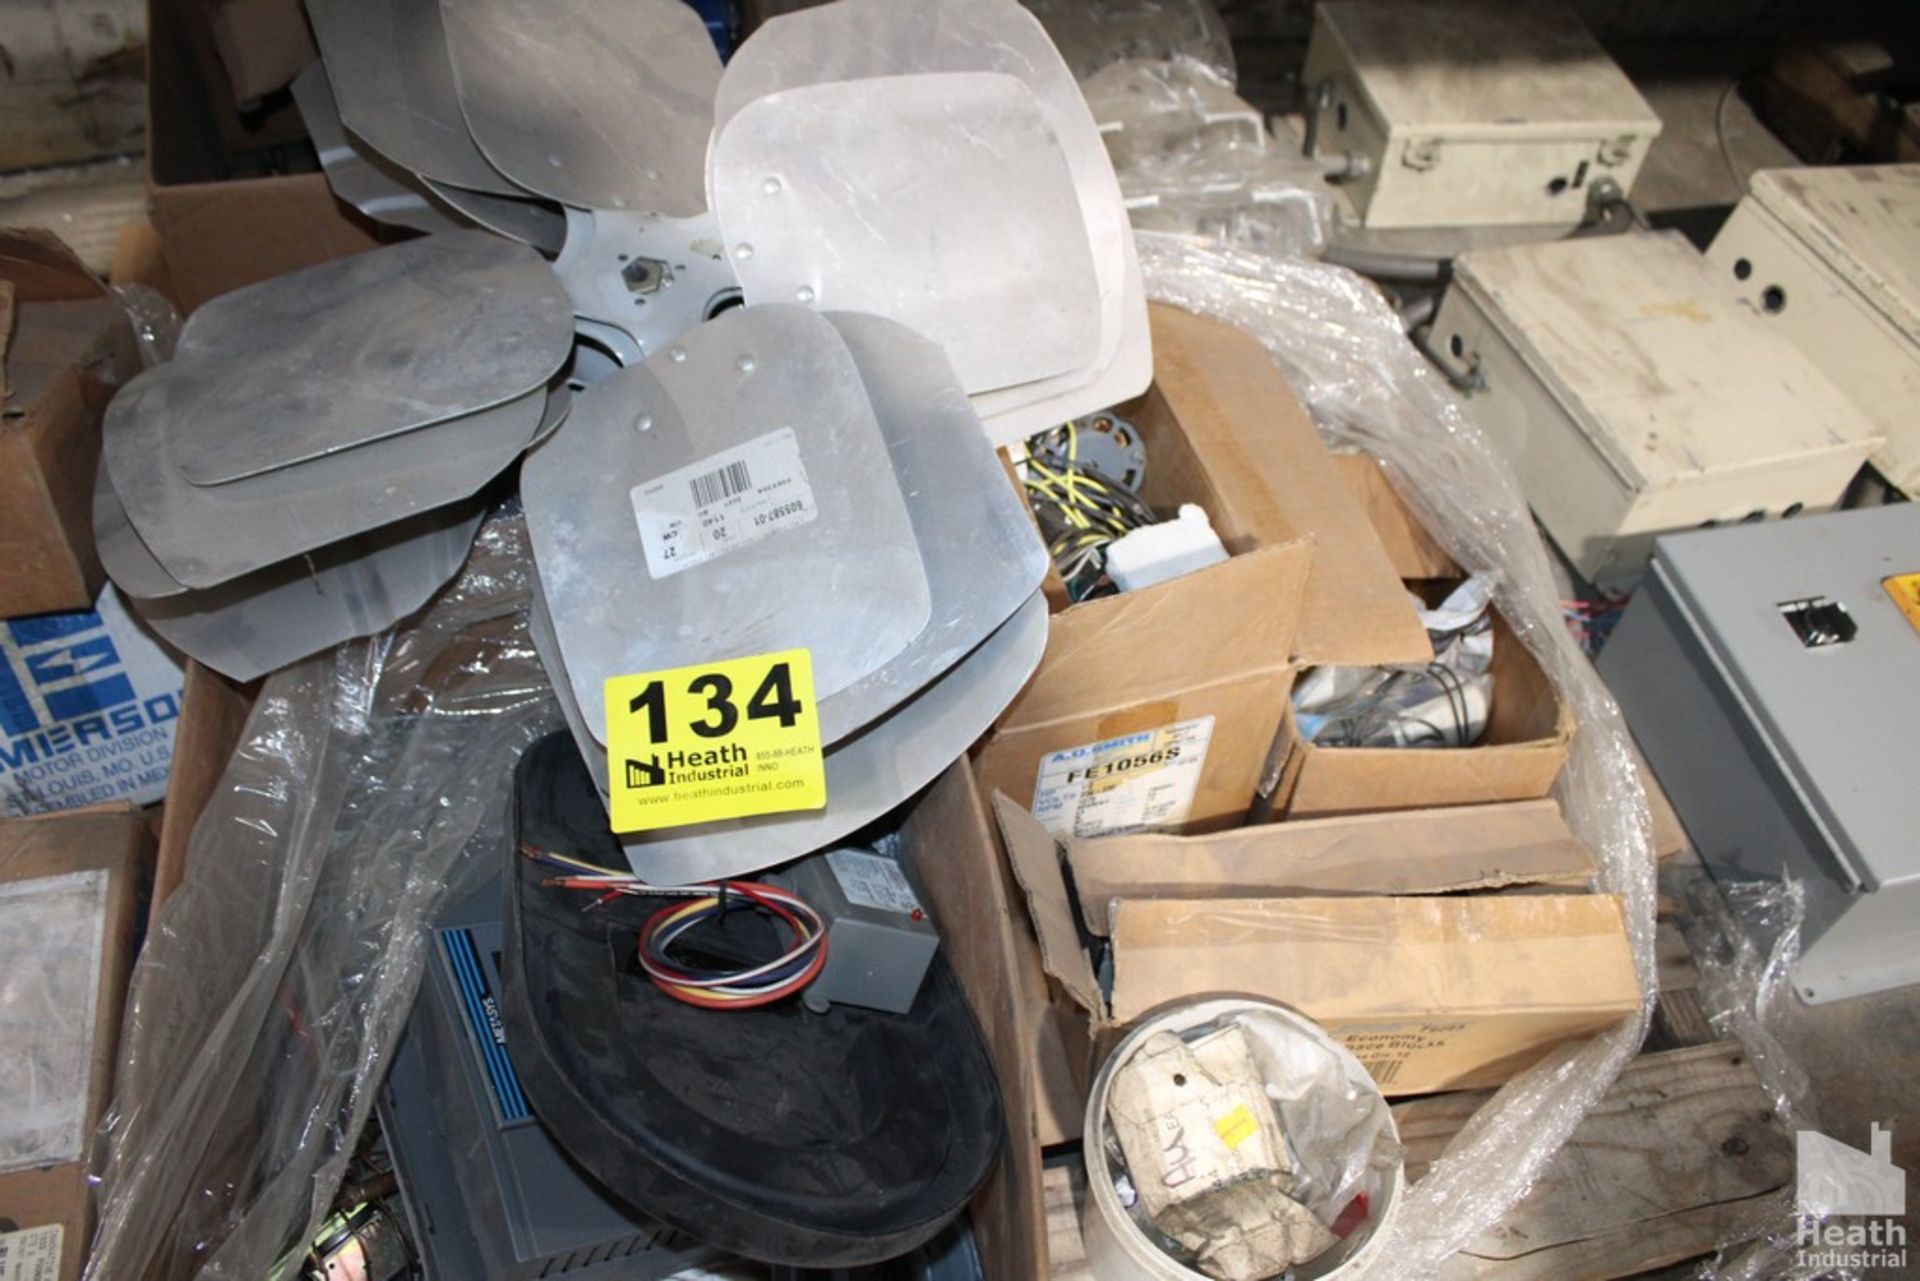 MISC. ELECTRICAL COMPONENTS, FAN BLADES & FITTINGS ON SKID - Image 3 of 3